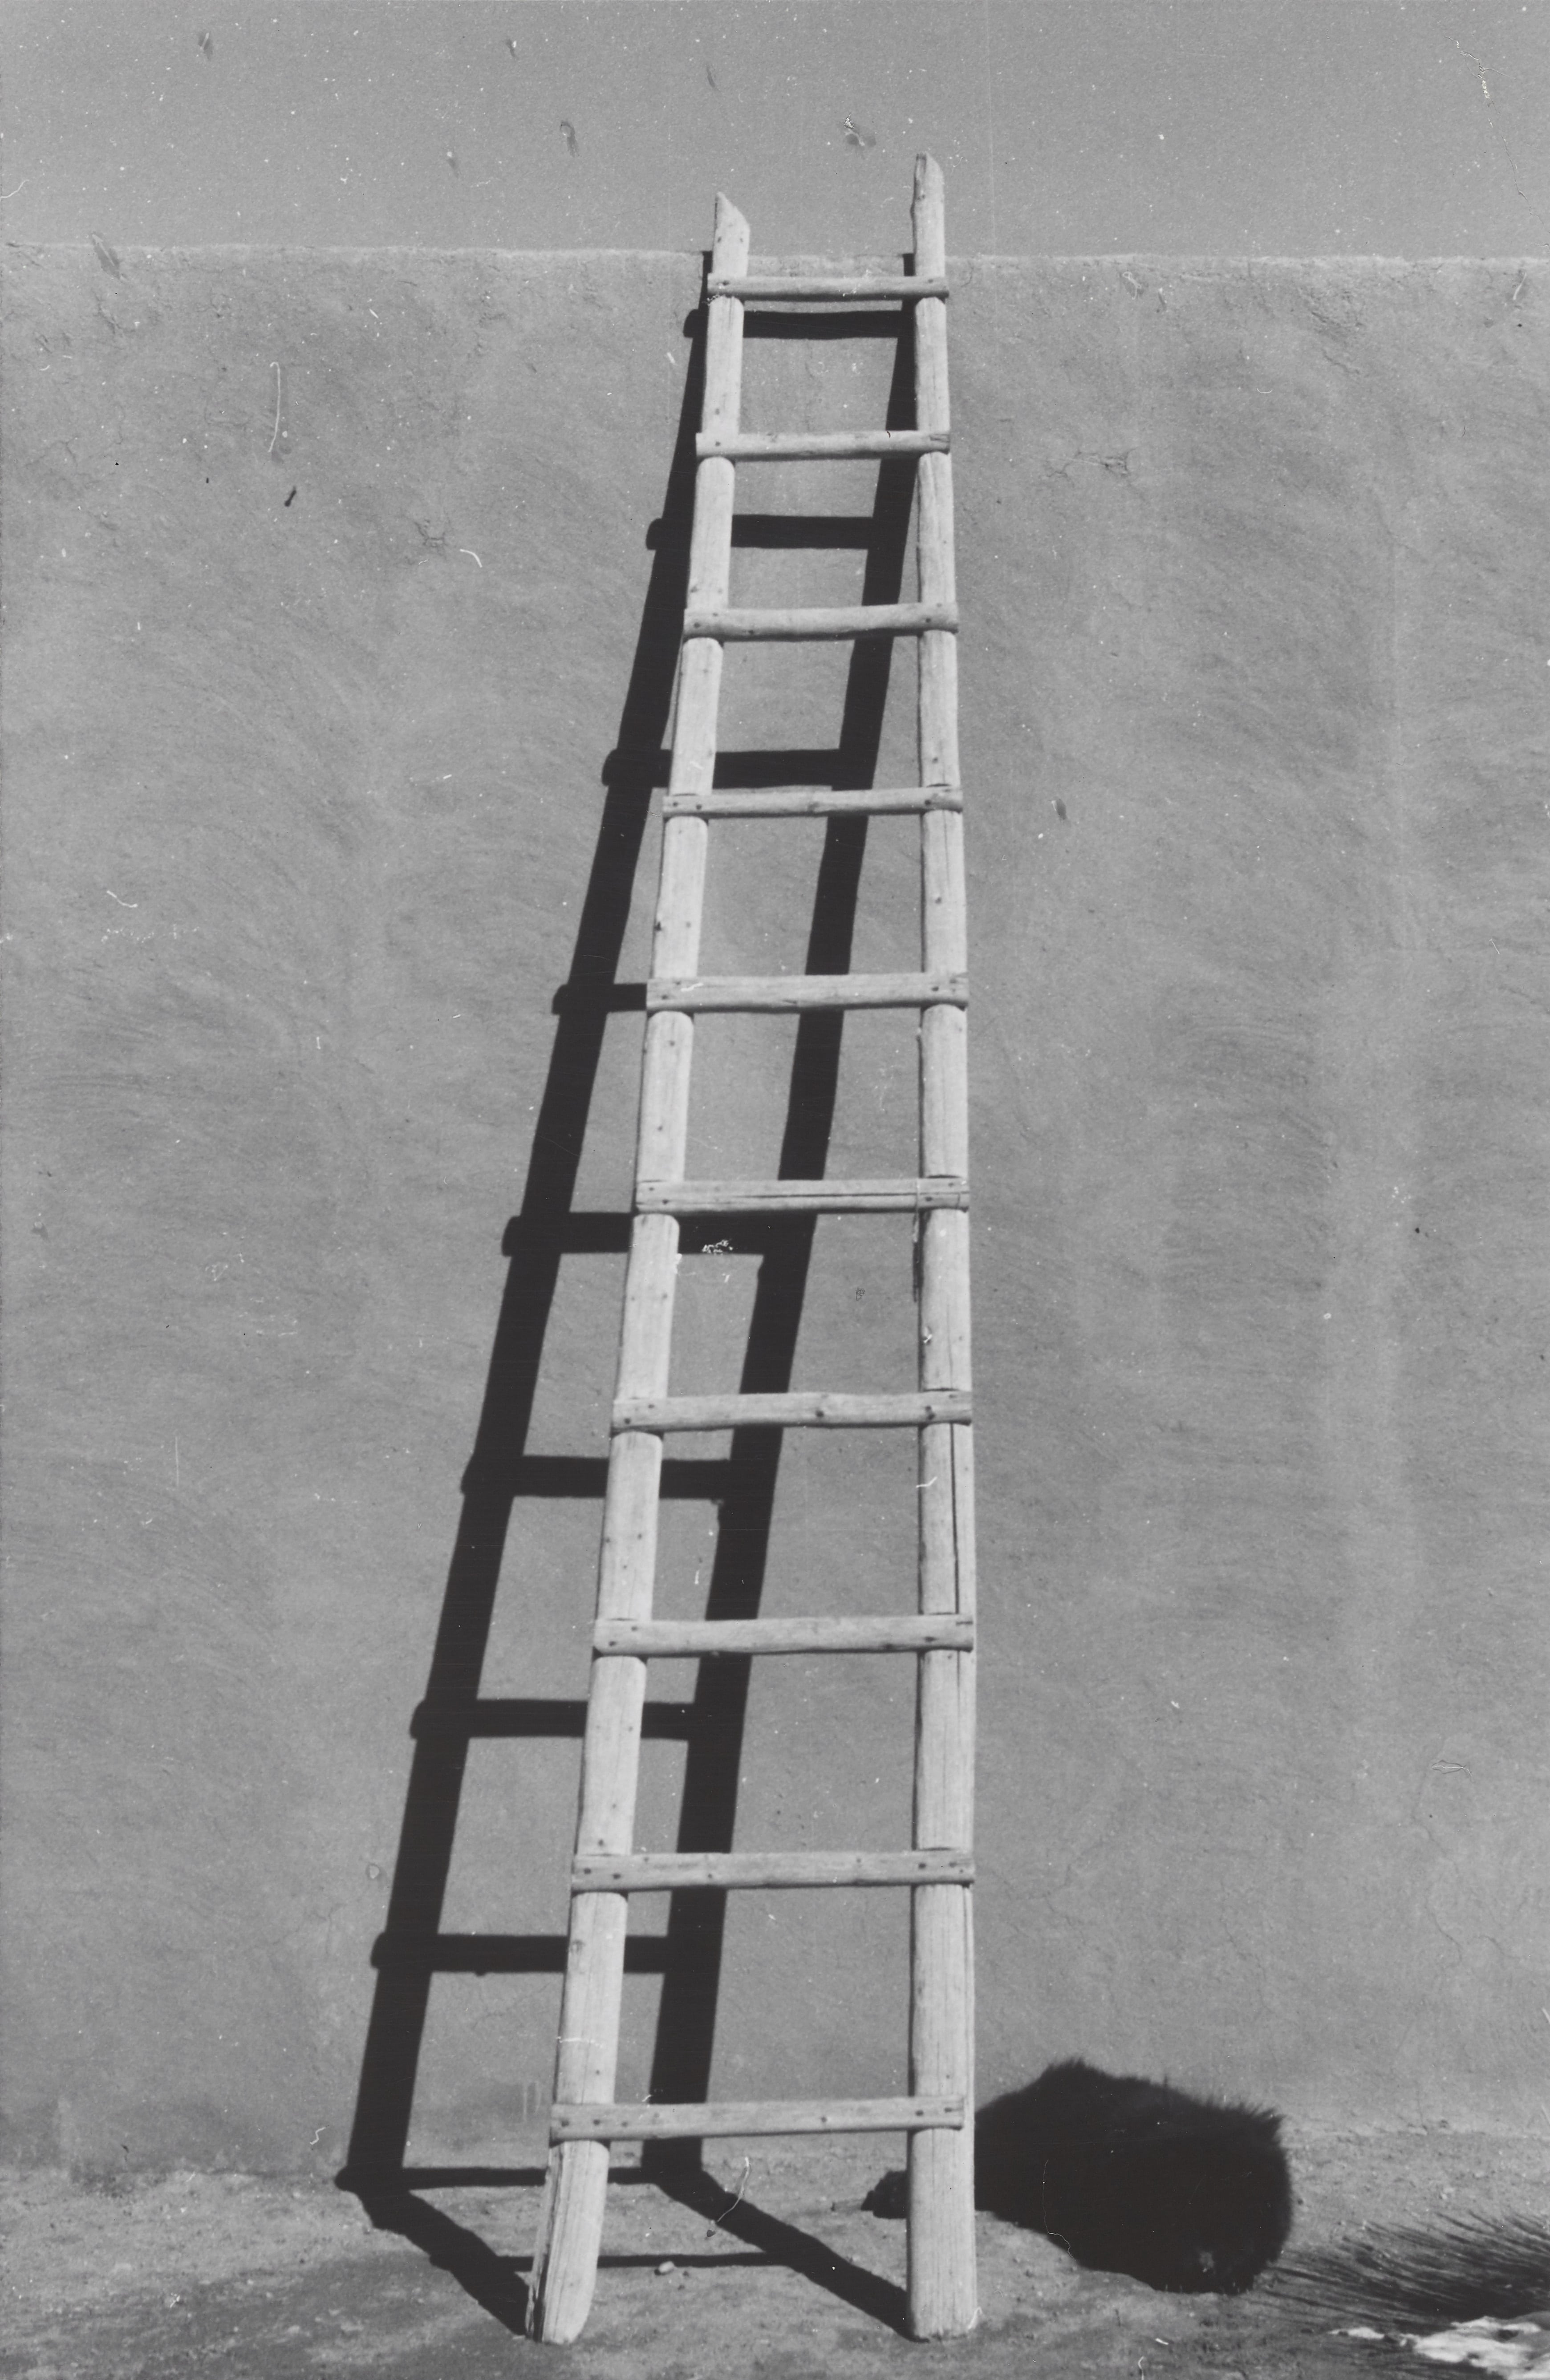 A photograph by Georgia O'Keeffe titled, "Ladder Against Studio Wall with Black Chow (Bo-Bo)"